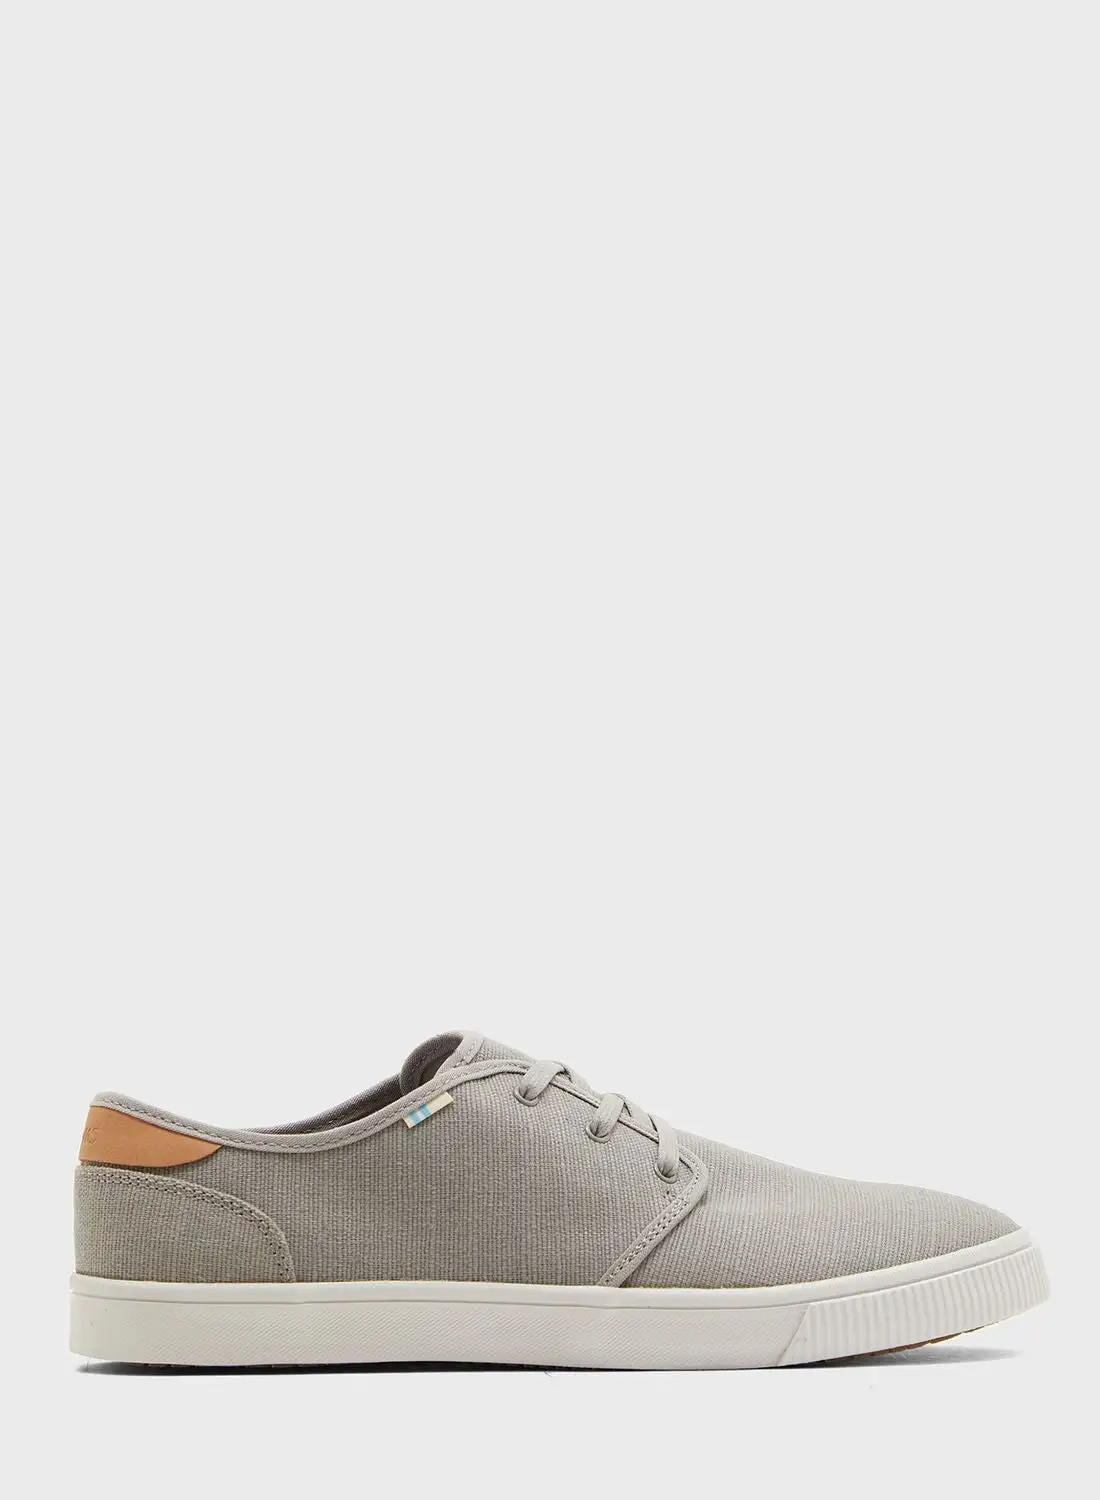 TOMS Heritage Canvas Sneakers